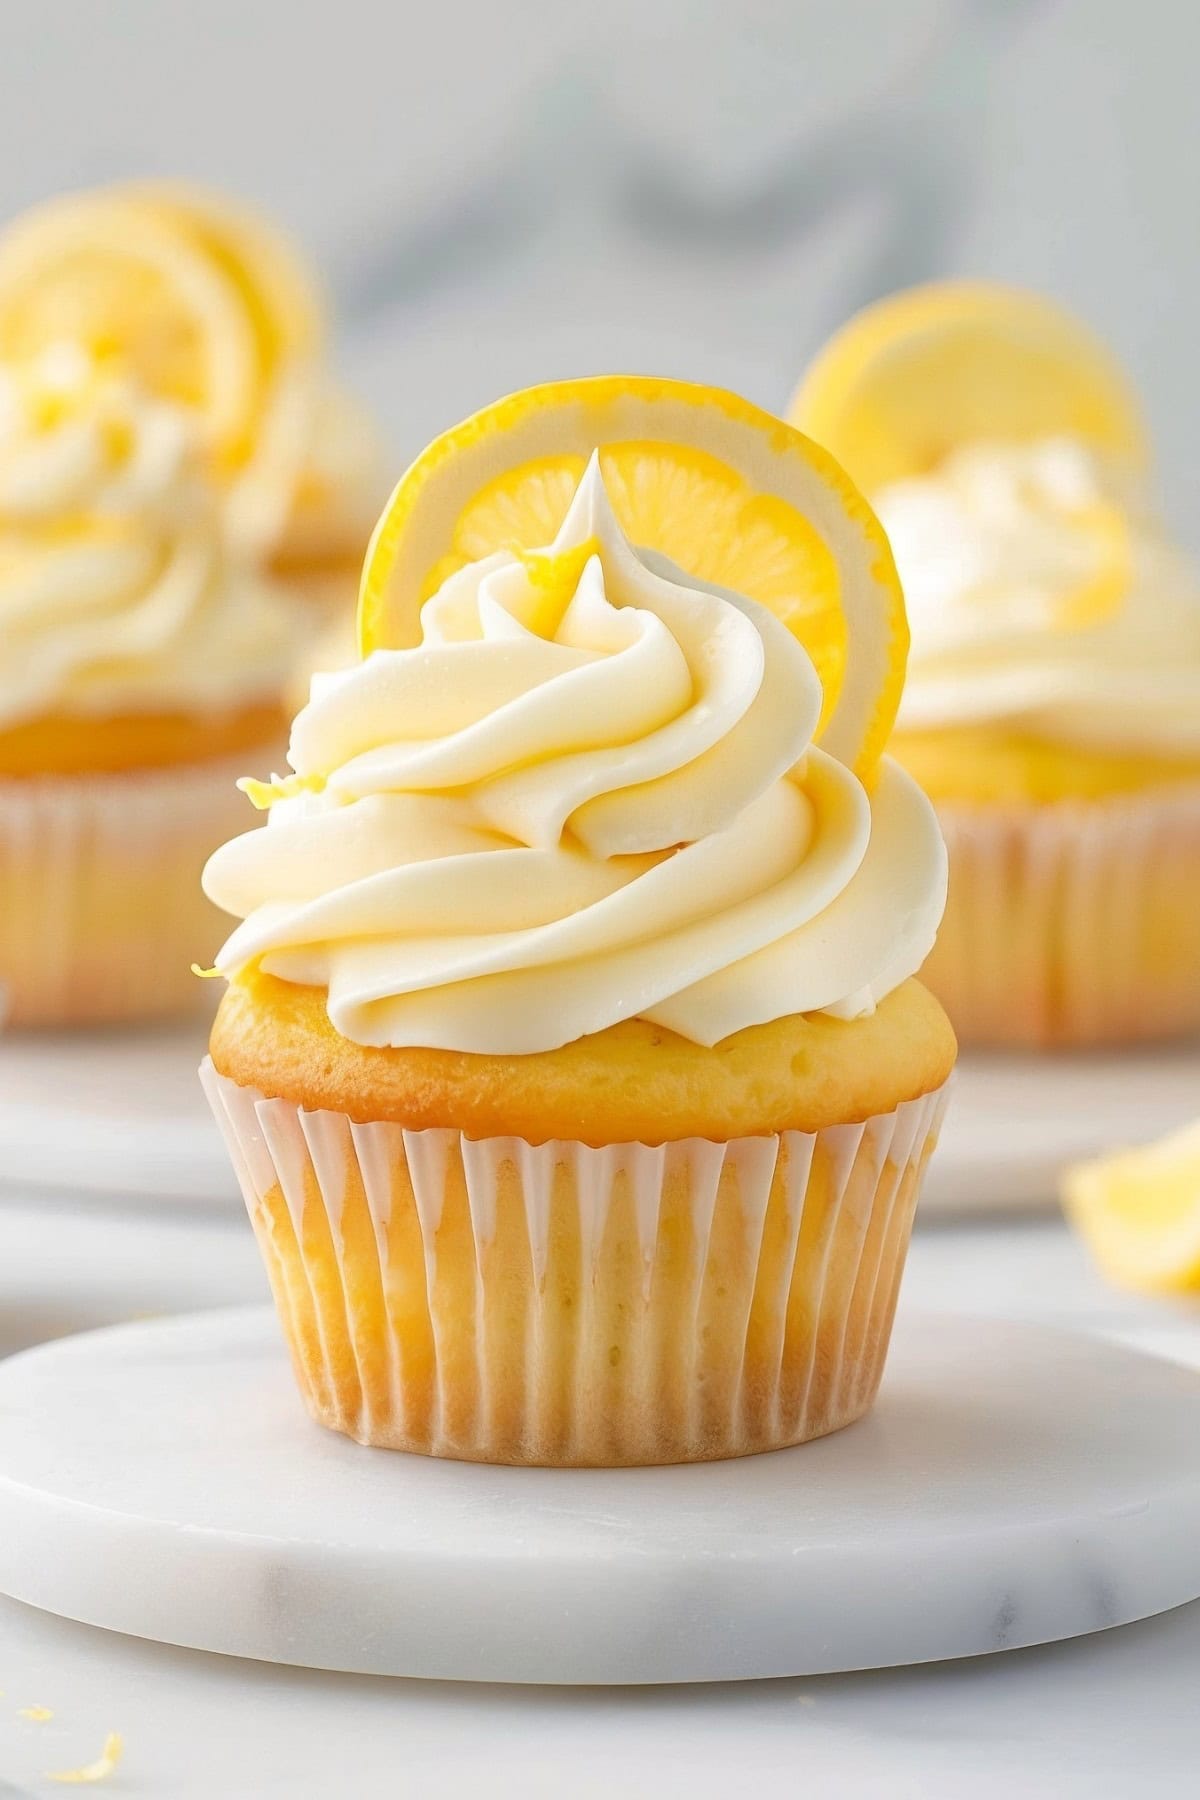 Irresistible homemade lemon cupcakes, moist and fluffy with a burst of citrus flavor in every bite.